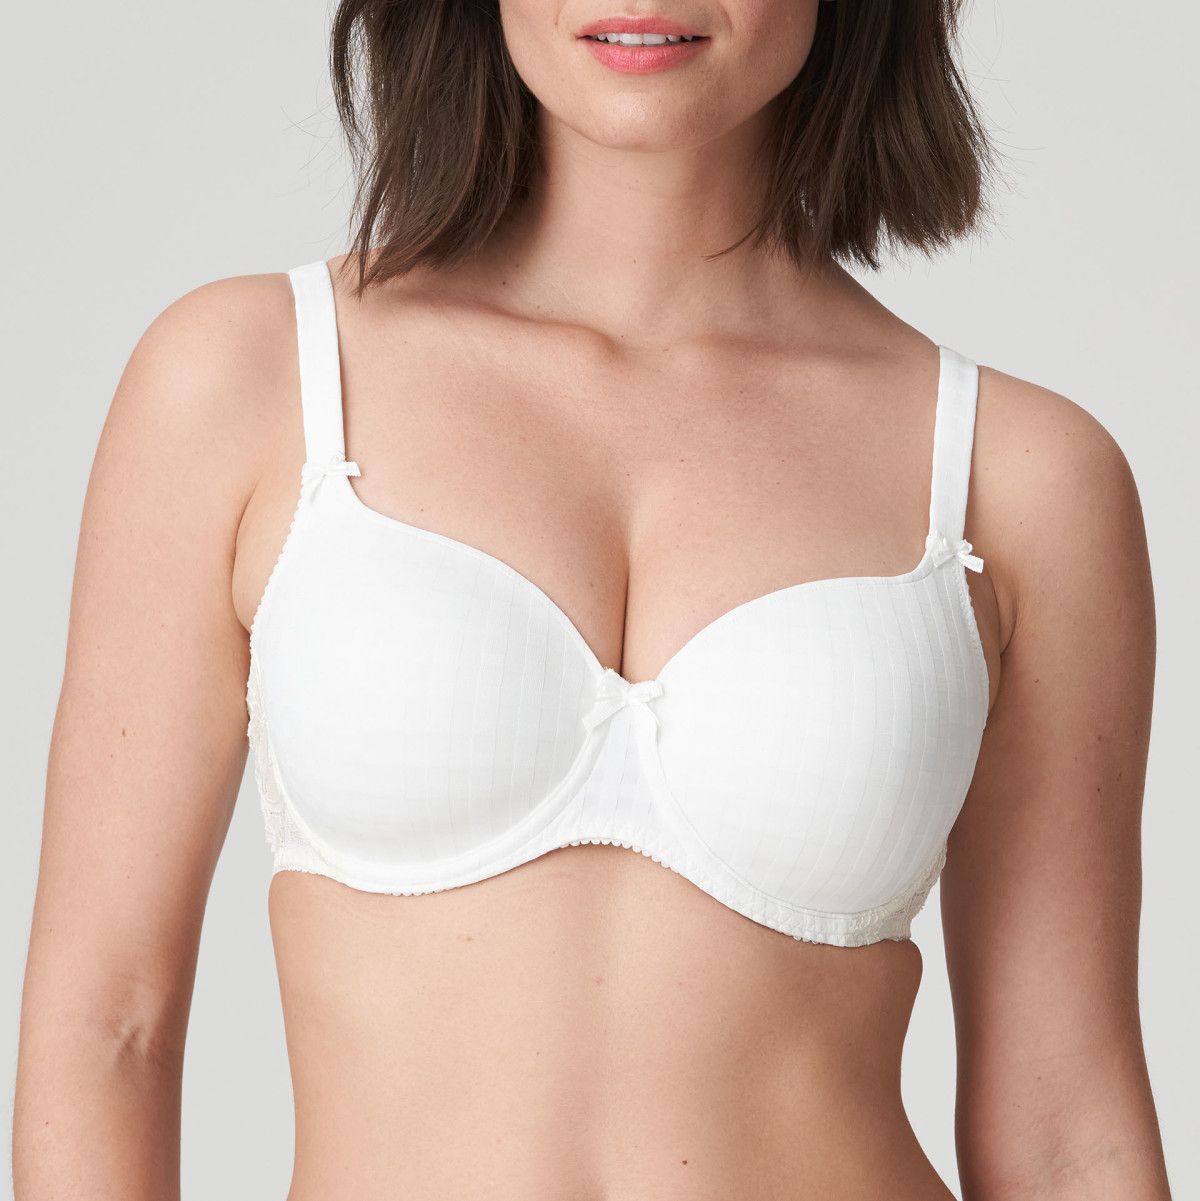 Heart-shaped bra with padded cups by Twist Prima Donna